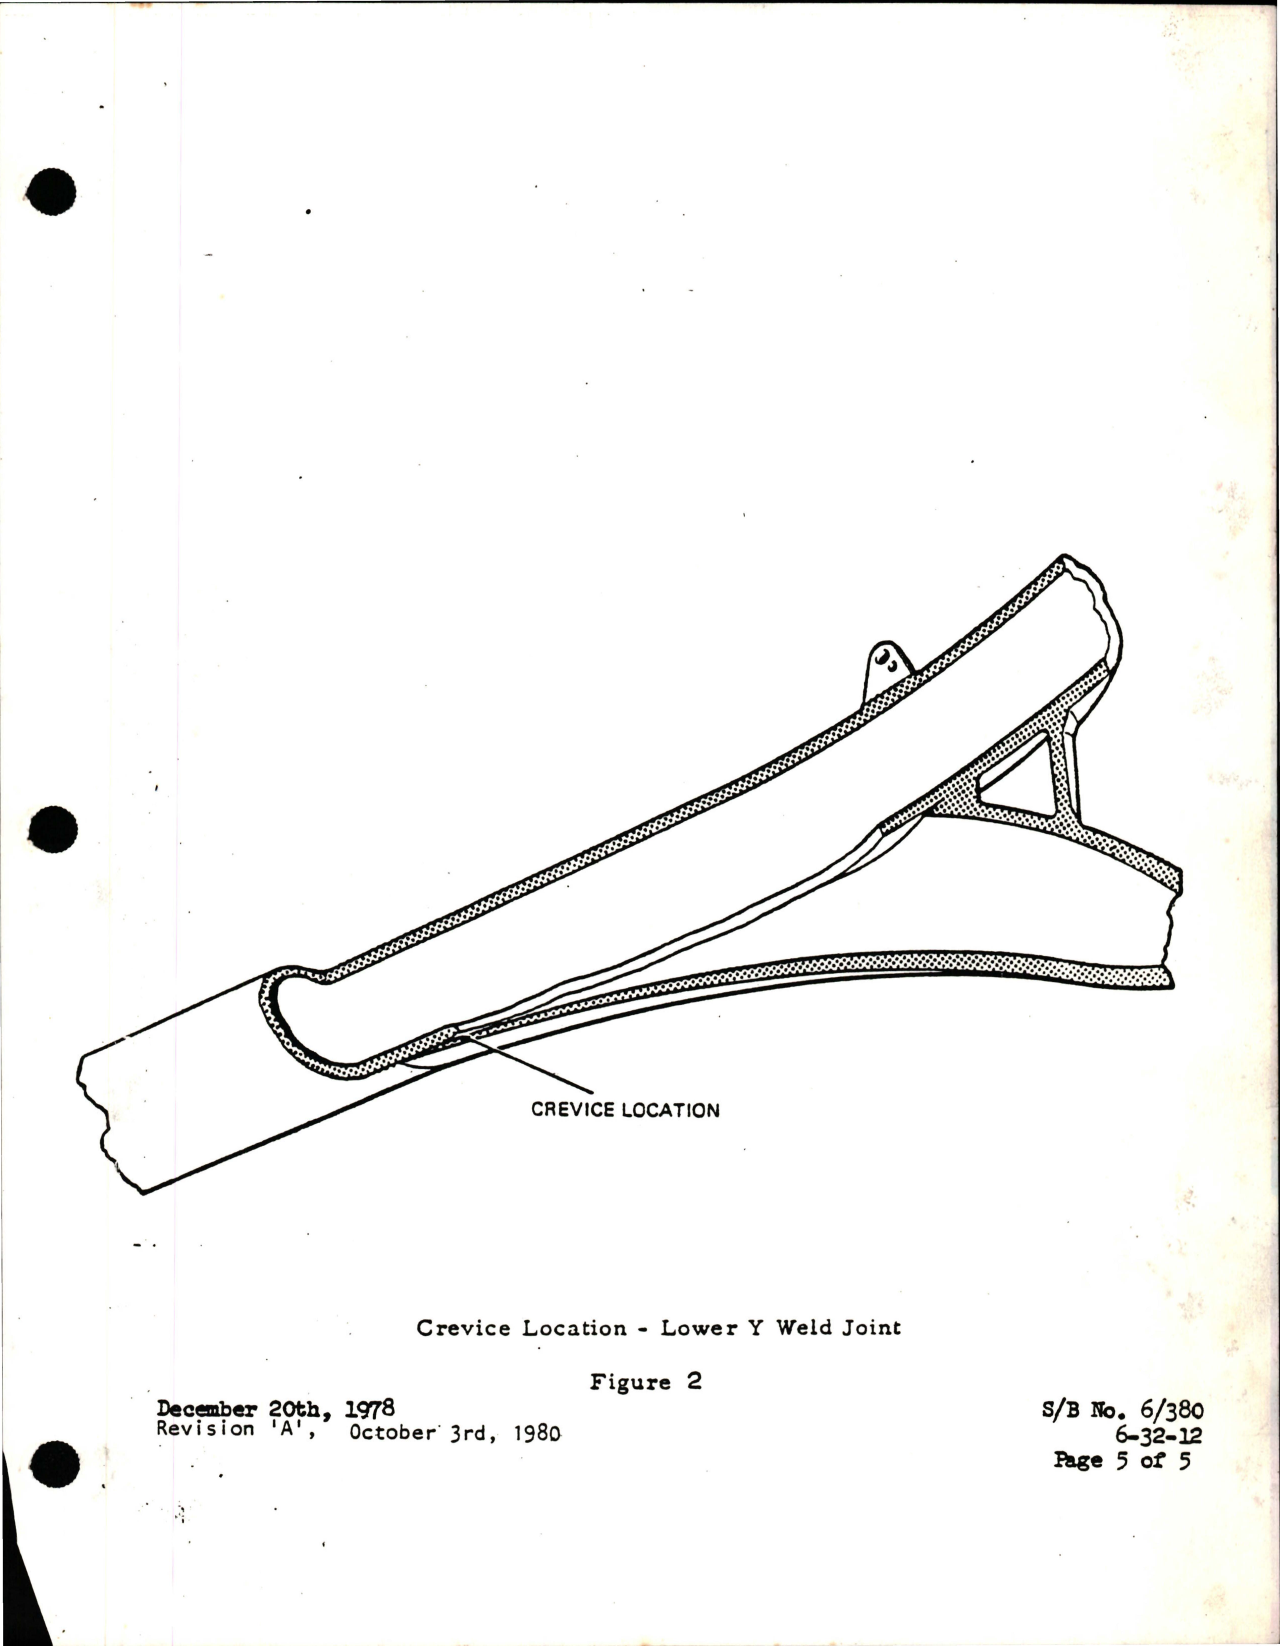 Sample page 5 from AirCorps Library document: Service Bulletin for Main Landing Gear Leg - Precautionary Inspection and Reprotection for DHC-6 Twin Otter